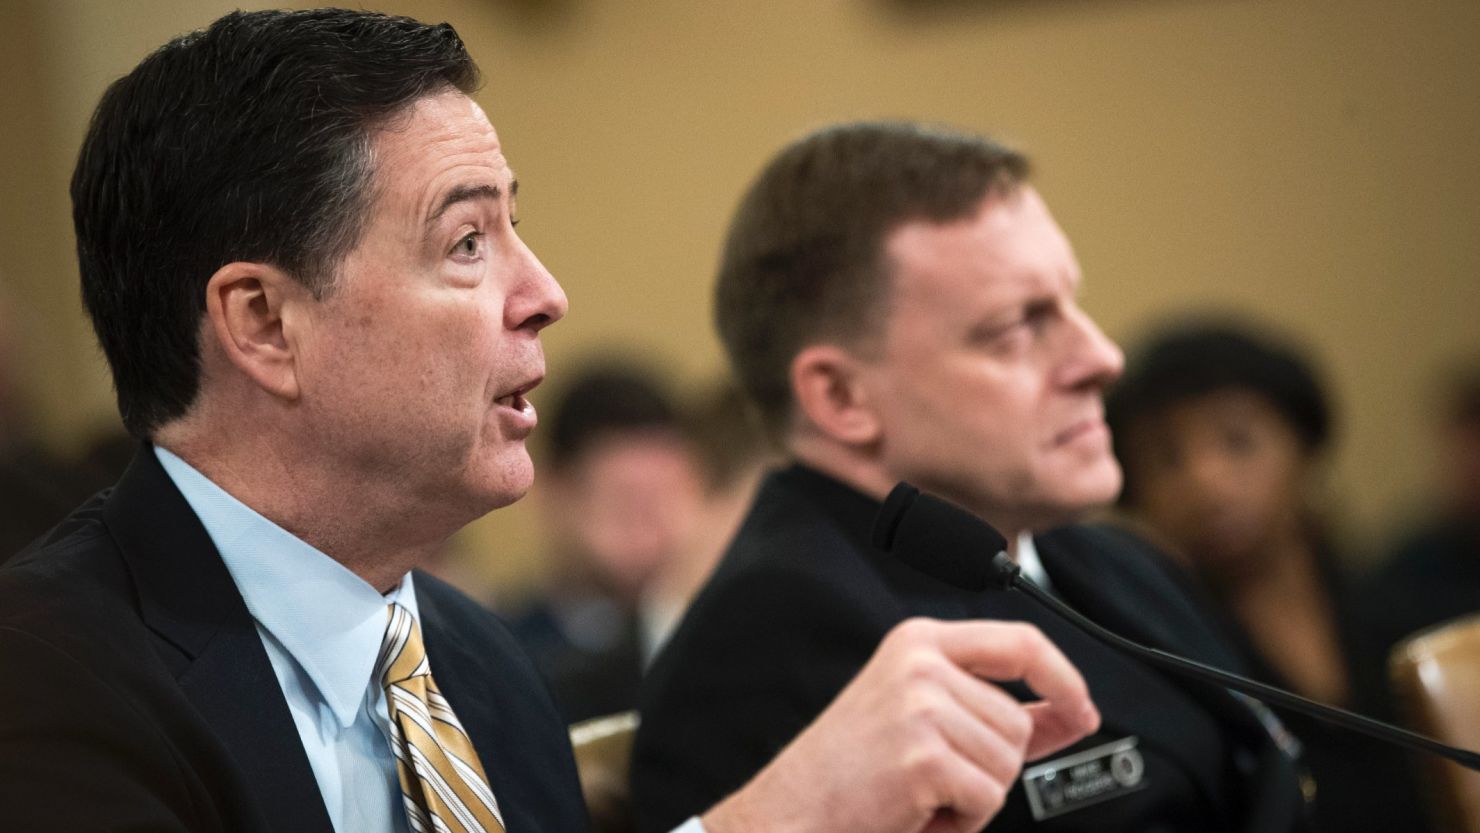 FBI Director James Comey and NSA Director Michael Rogers testify during a House intelligence hearing concerning Russian meddling in the 2016 US election. (Drew Angerer/Getty Images)